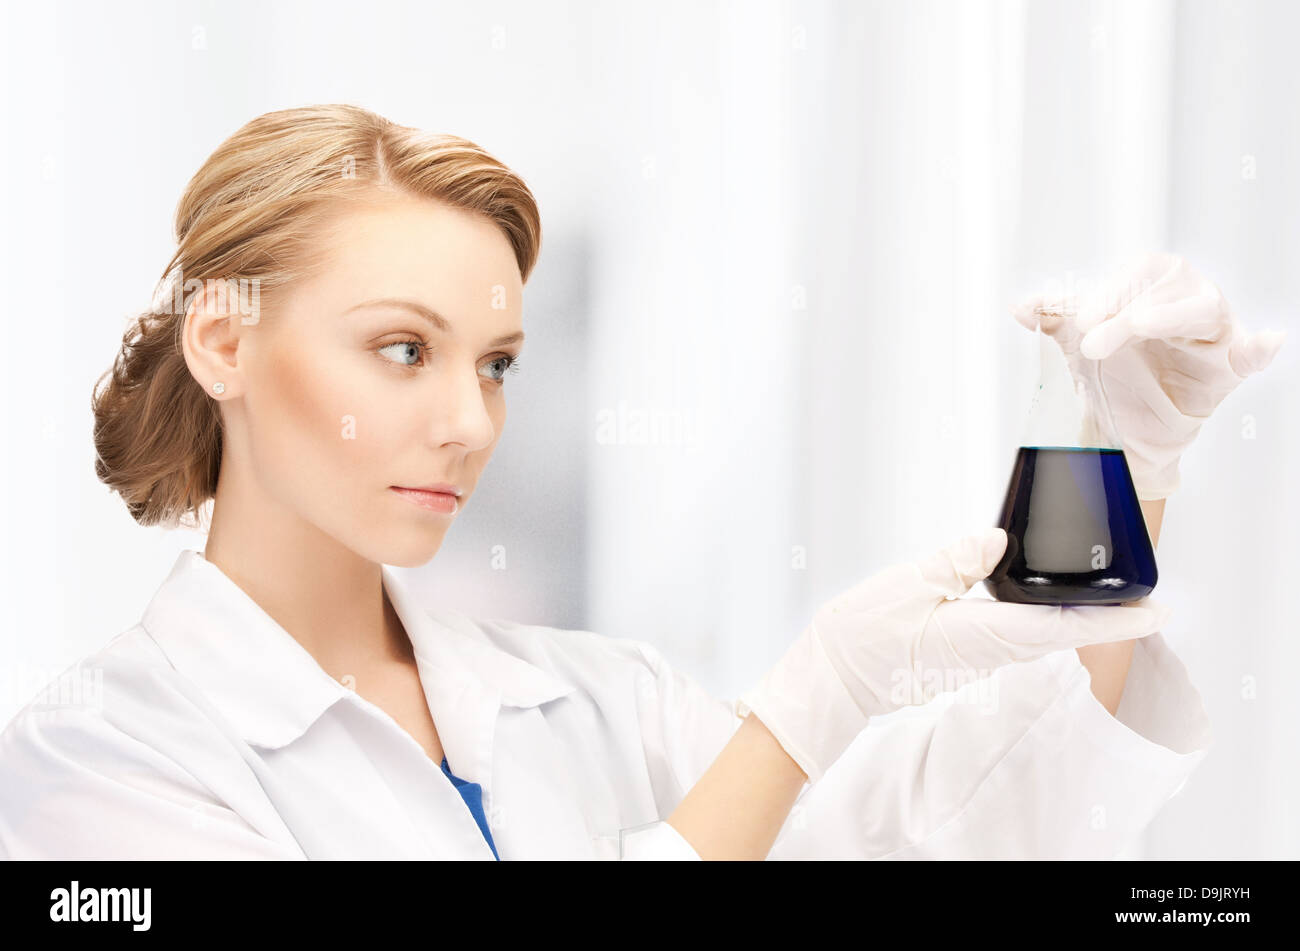 female chemist holding bulb with chemicals Stock Photo